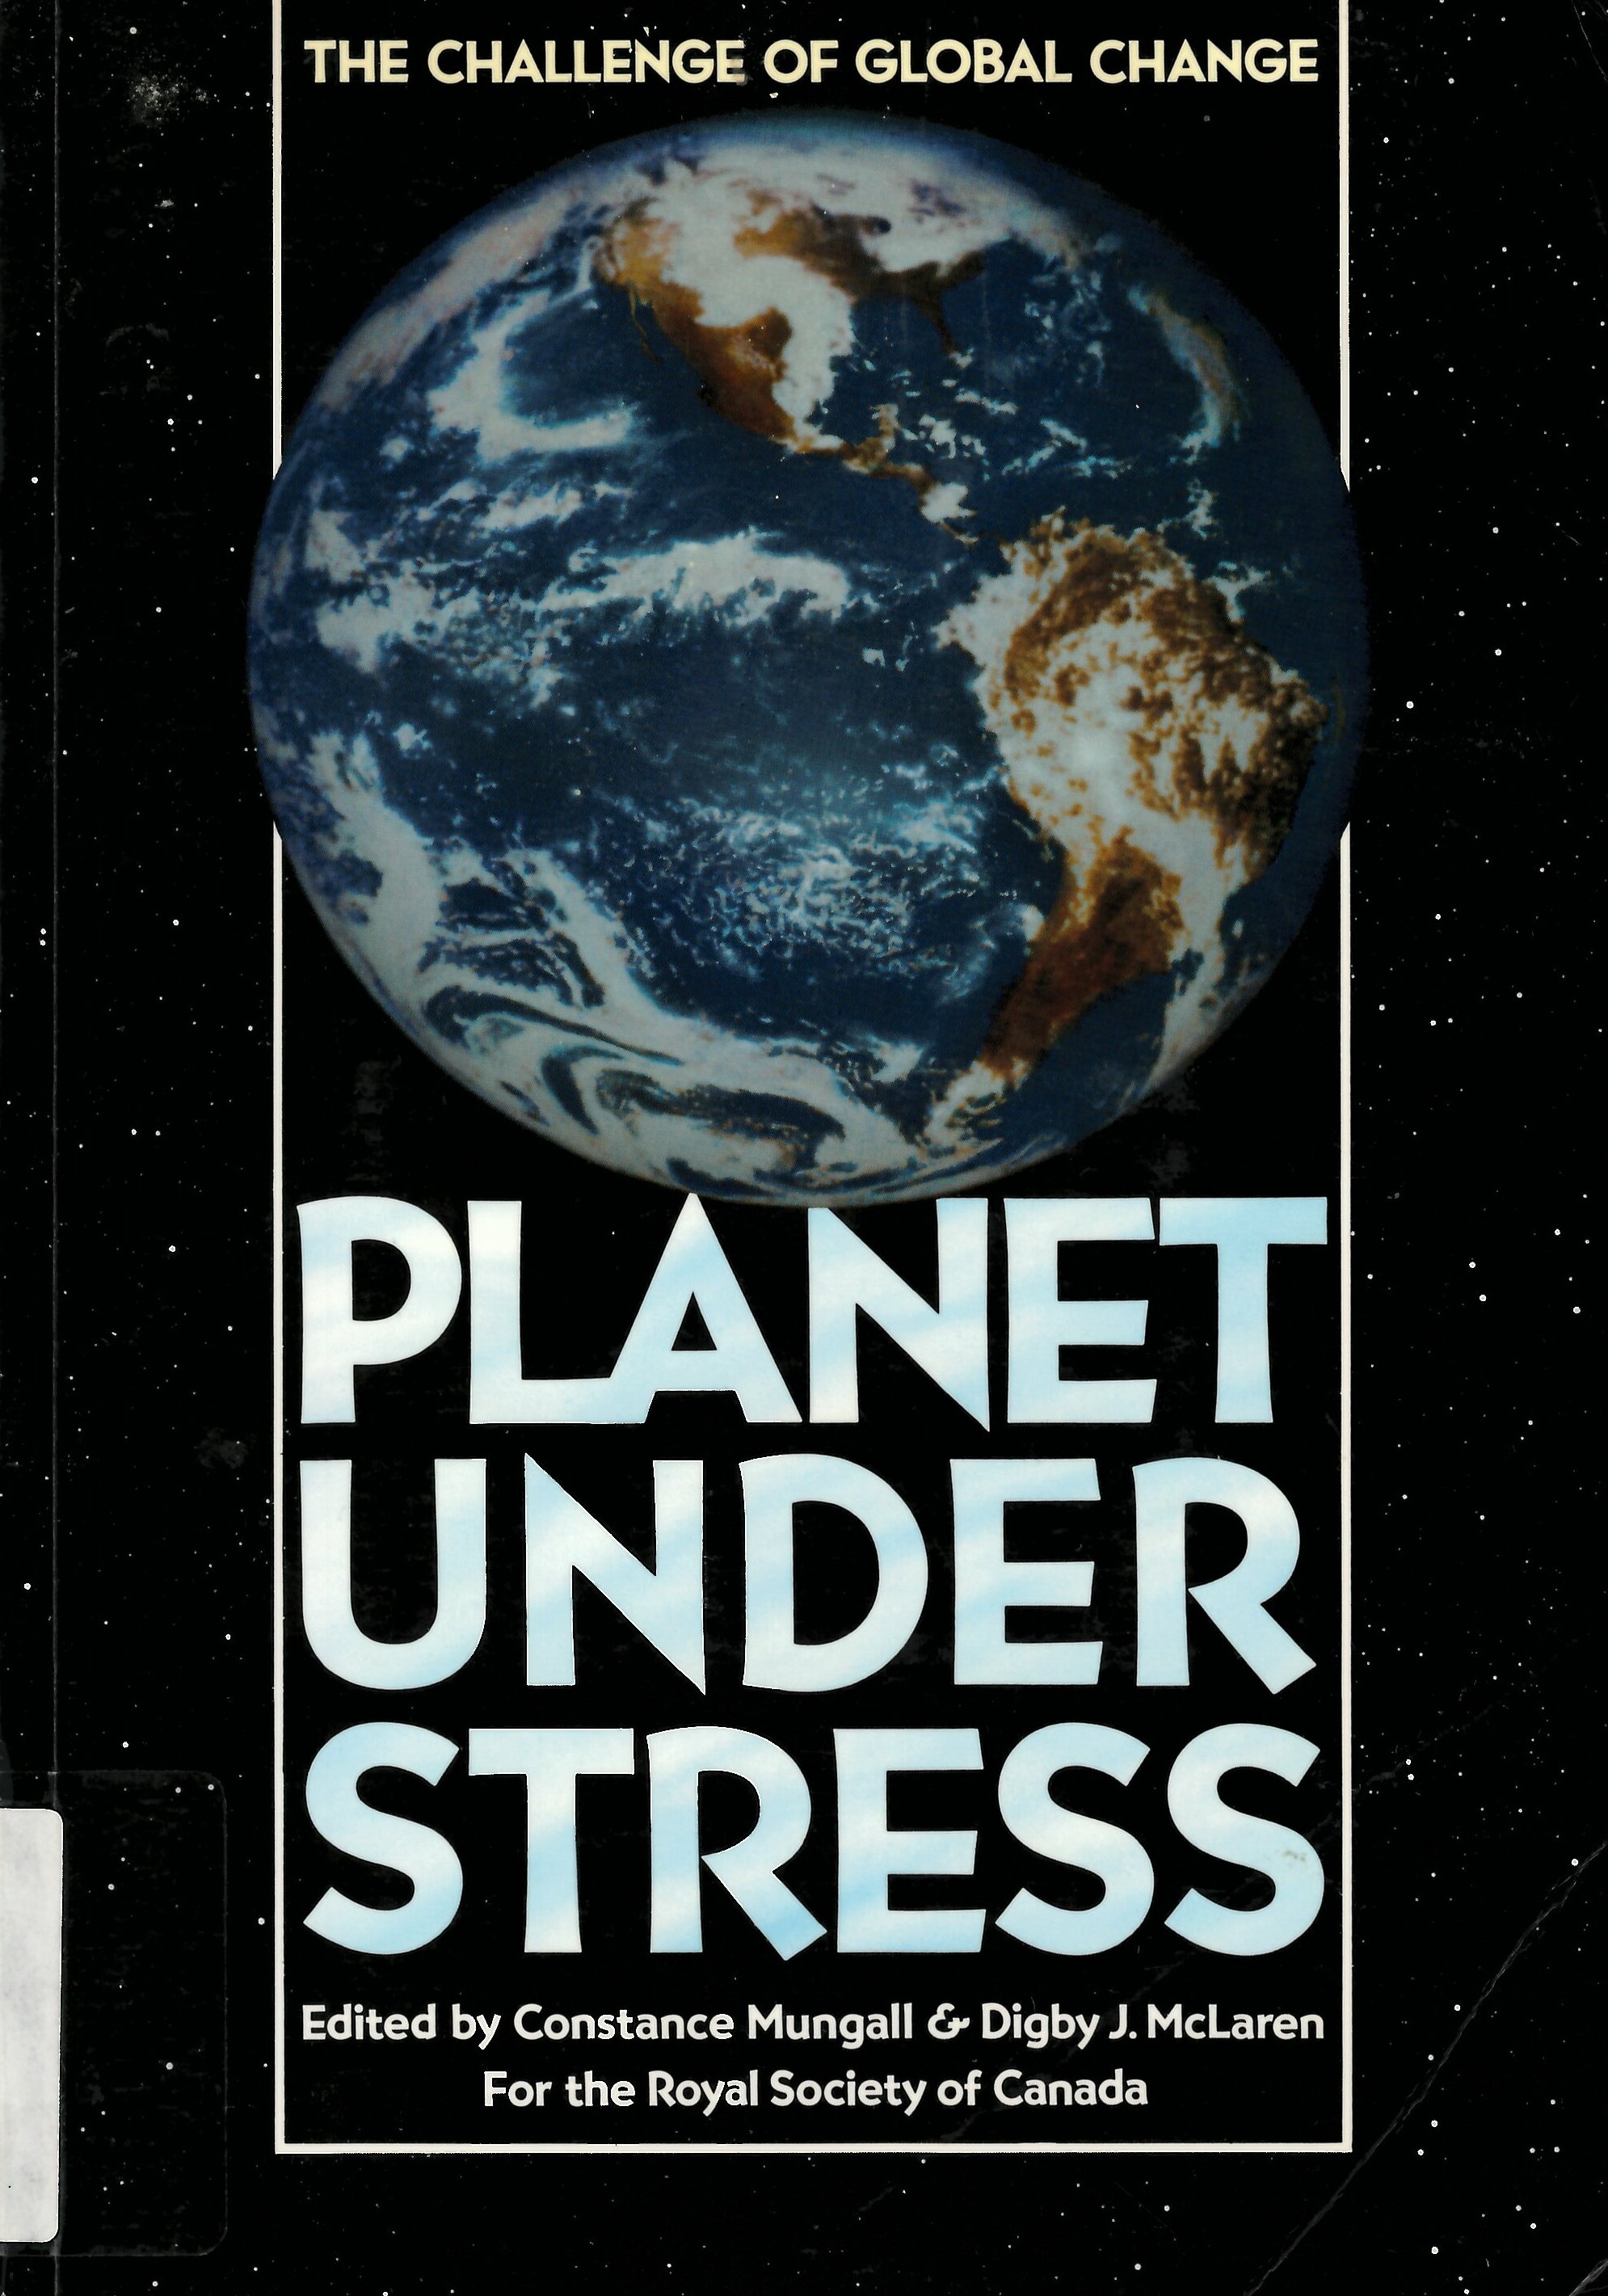 Planet under stress: the challenge of global change